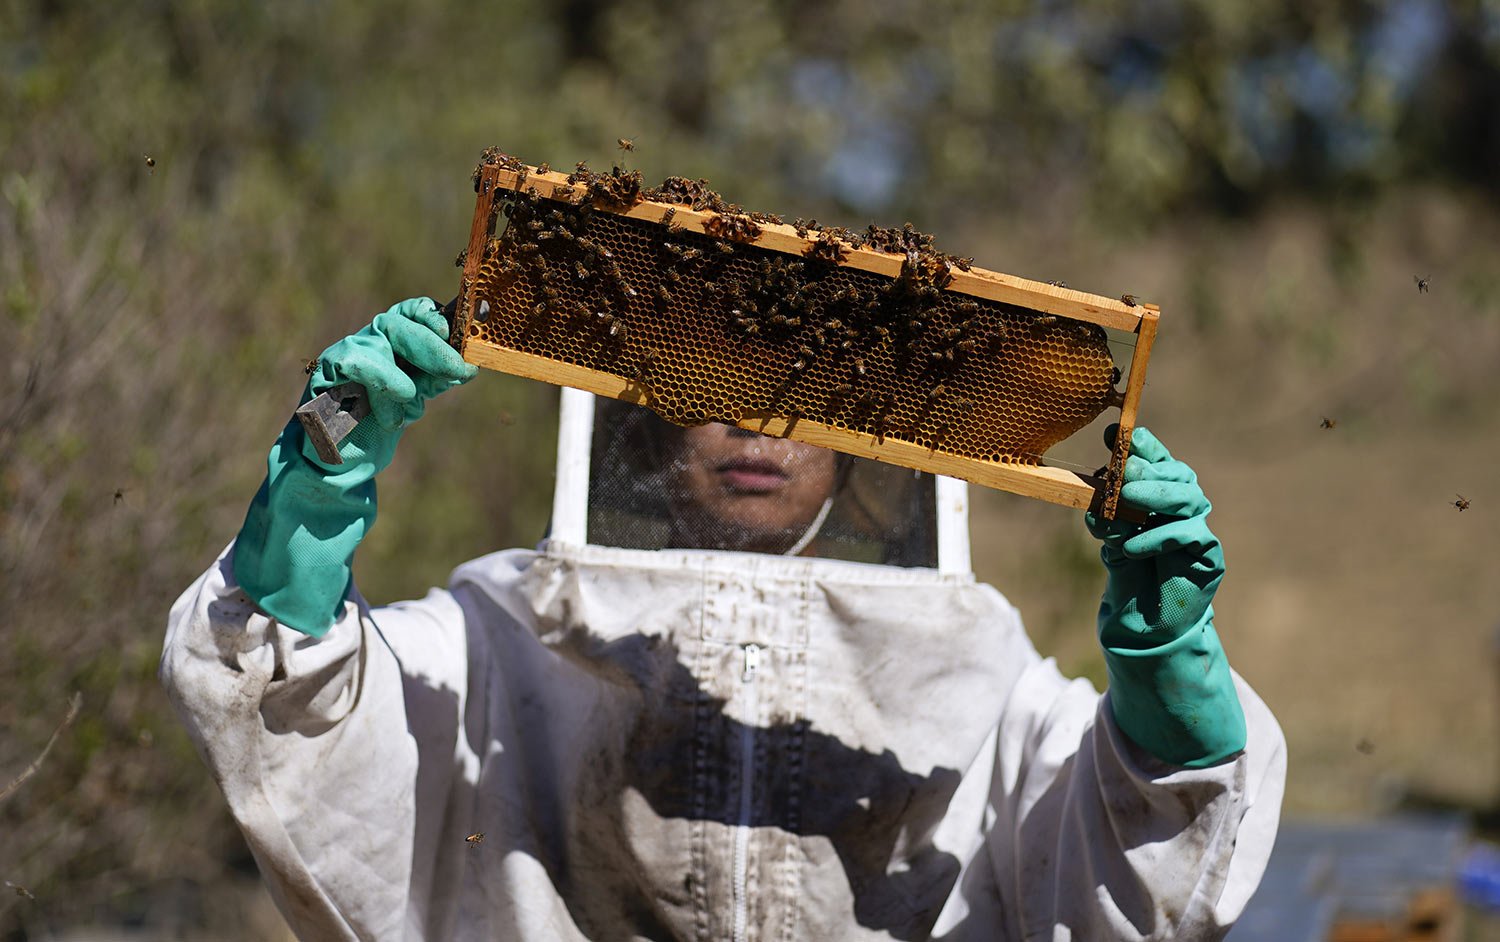  Adriana Veliz searches for the queen bee from the most recent group of bees rescued by the SOS Abeja Negra organization, in Xochimilco, Mexico, June 13, 2023. "We do these rescues because it's a species that's in danger of extinction," said Velíz. (